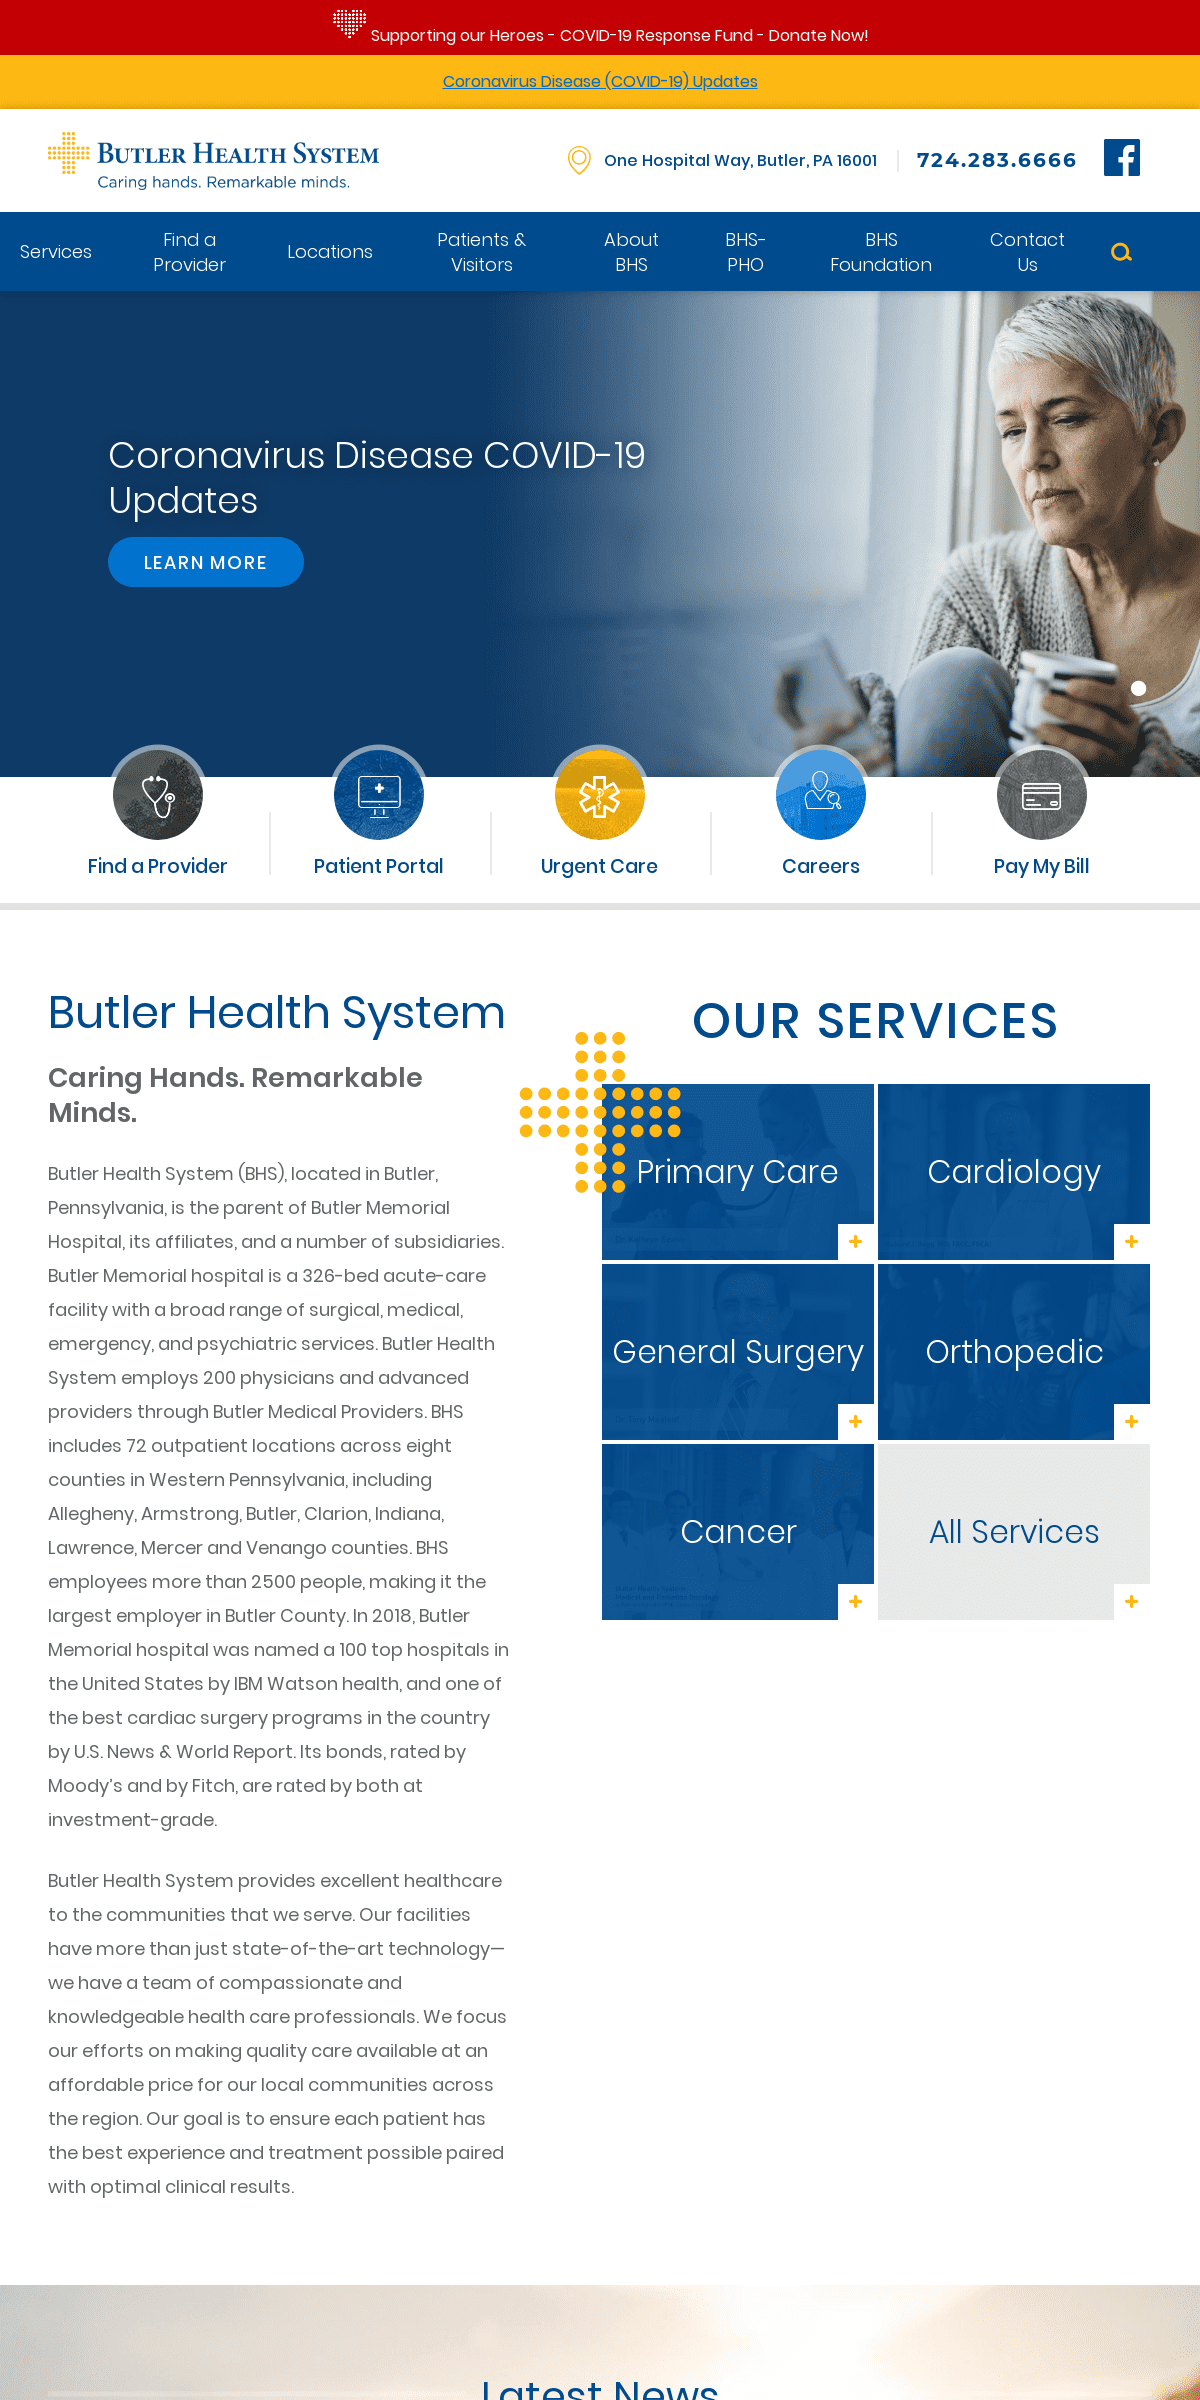 A complete backup of butlerhealthsystem.org